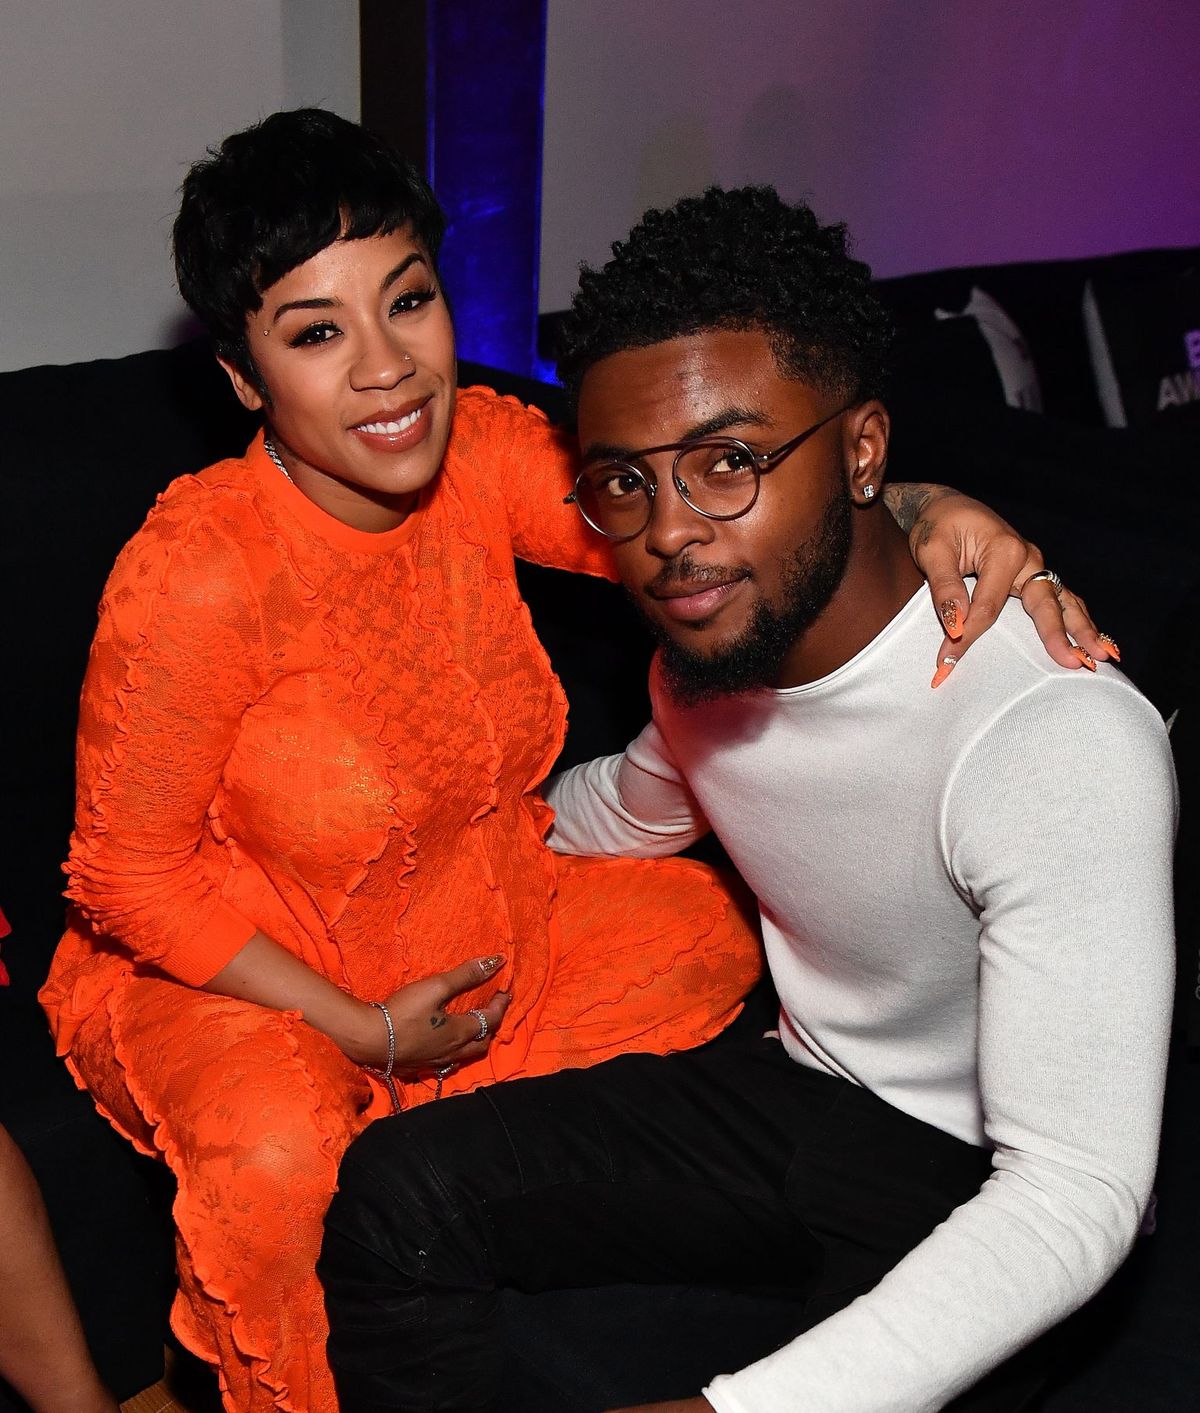 Keyshia Cole and Niko Khale at PREMIX Hosted By Connie Orlando at The Sunset Room on June 20, 2019 in Los Angeles, California | Photo: Getty Images